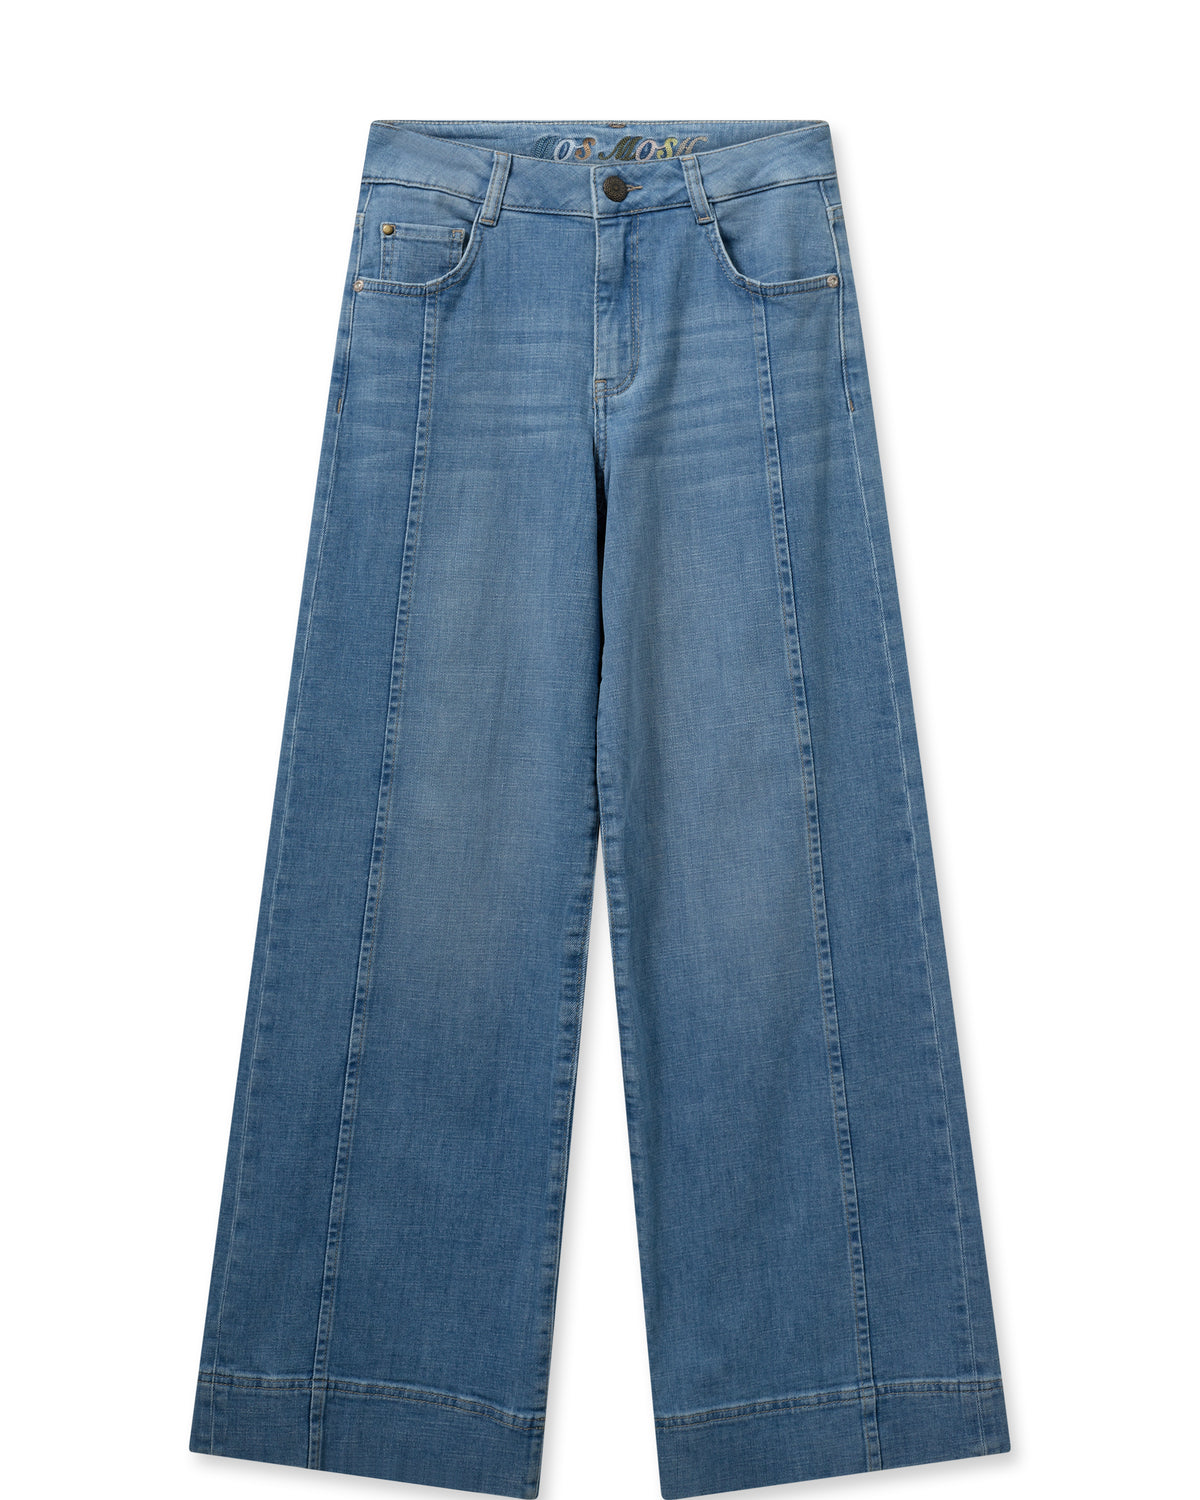 Wide leg pale wash jeans with front seam detail